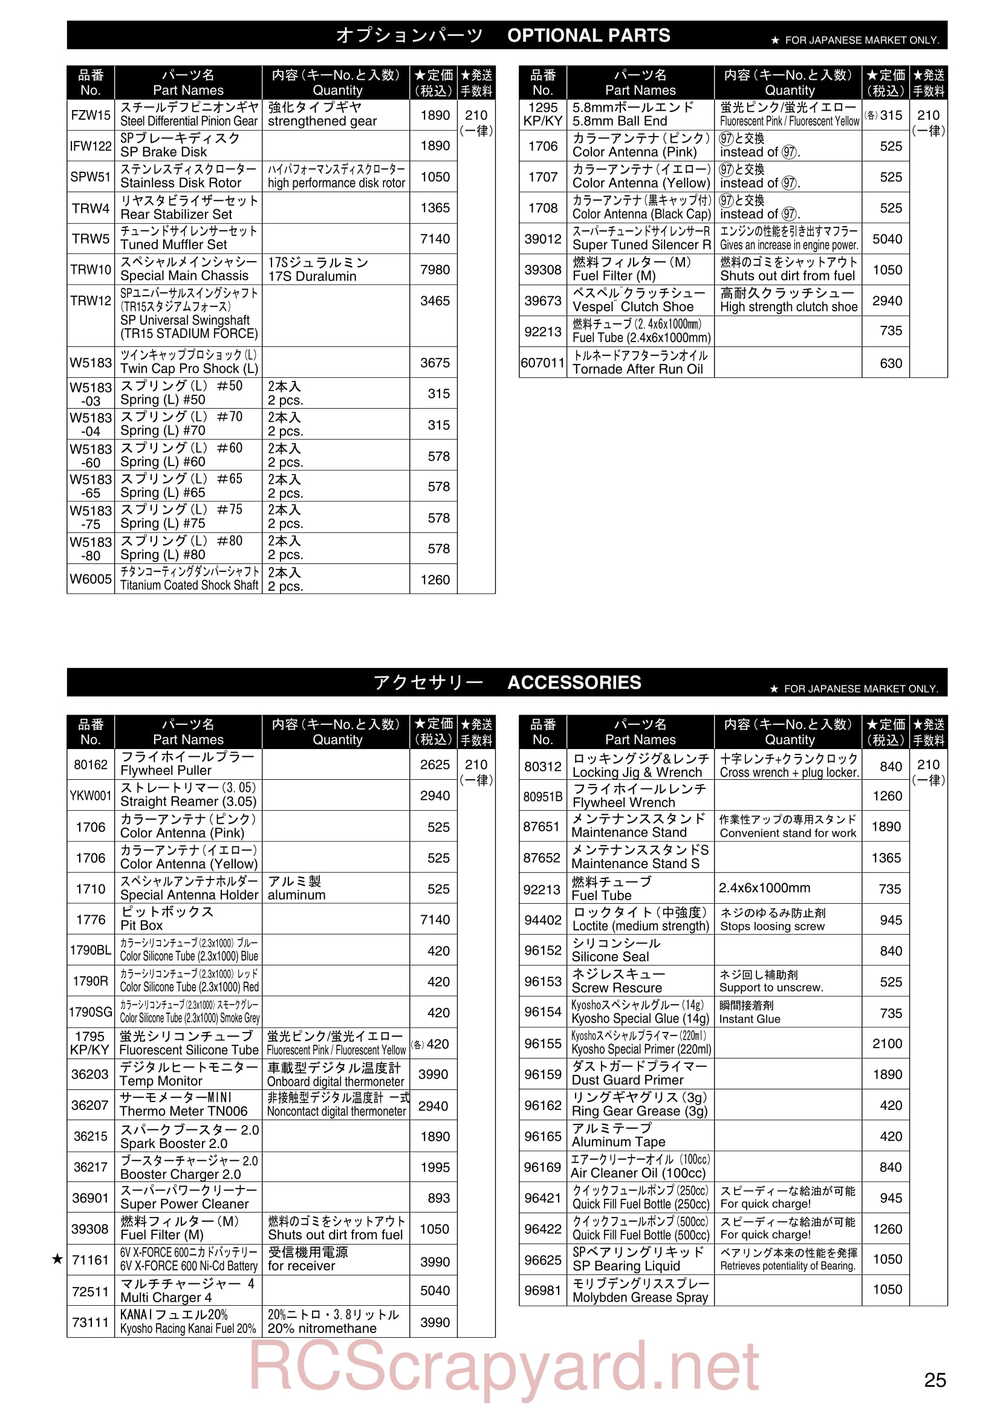 Kyosho - 31095 - TR-15 Stadium-Force - Manual - Page 24